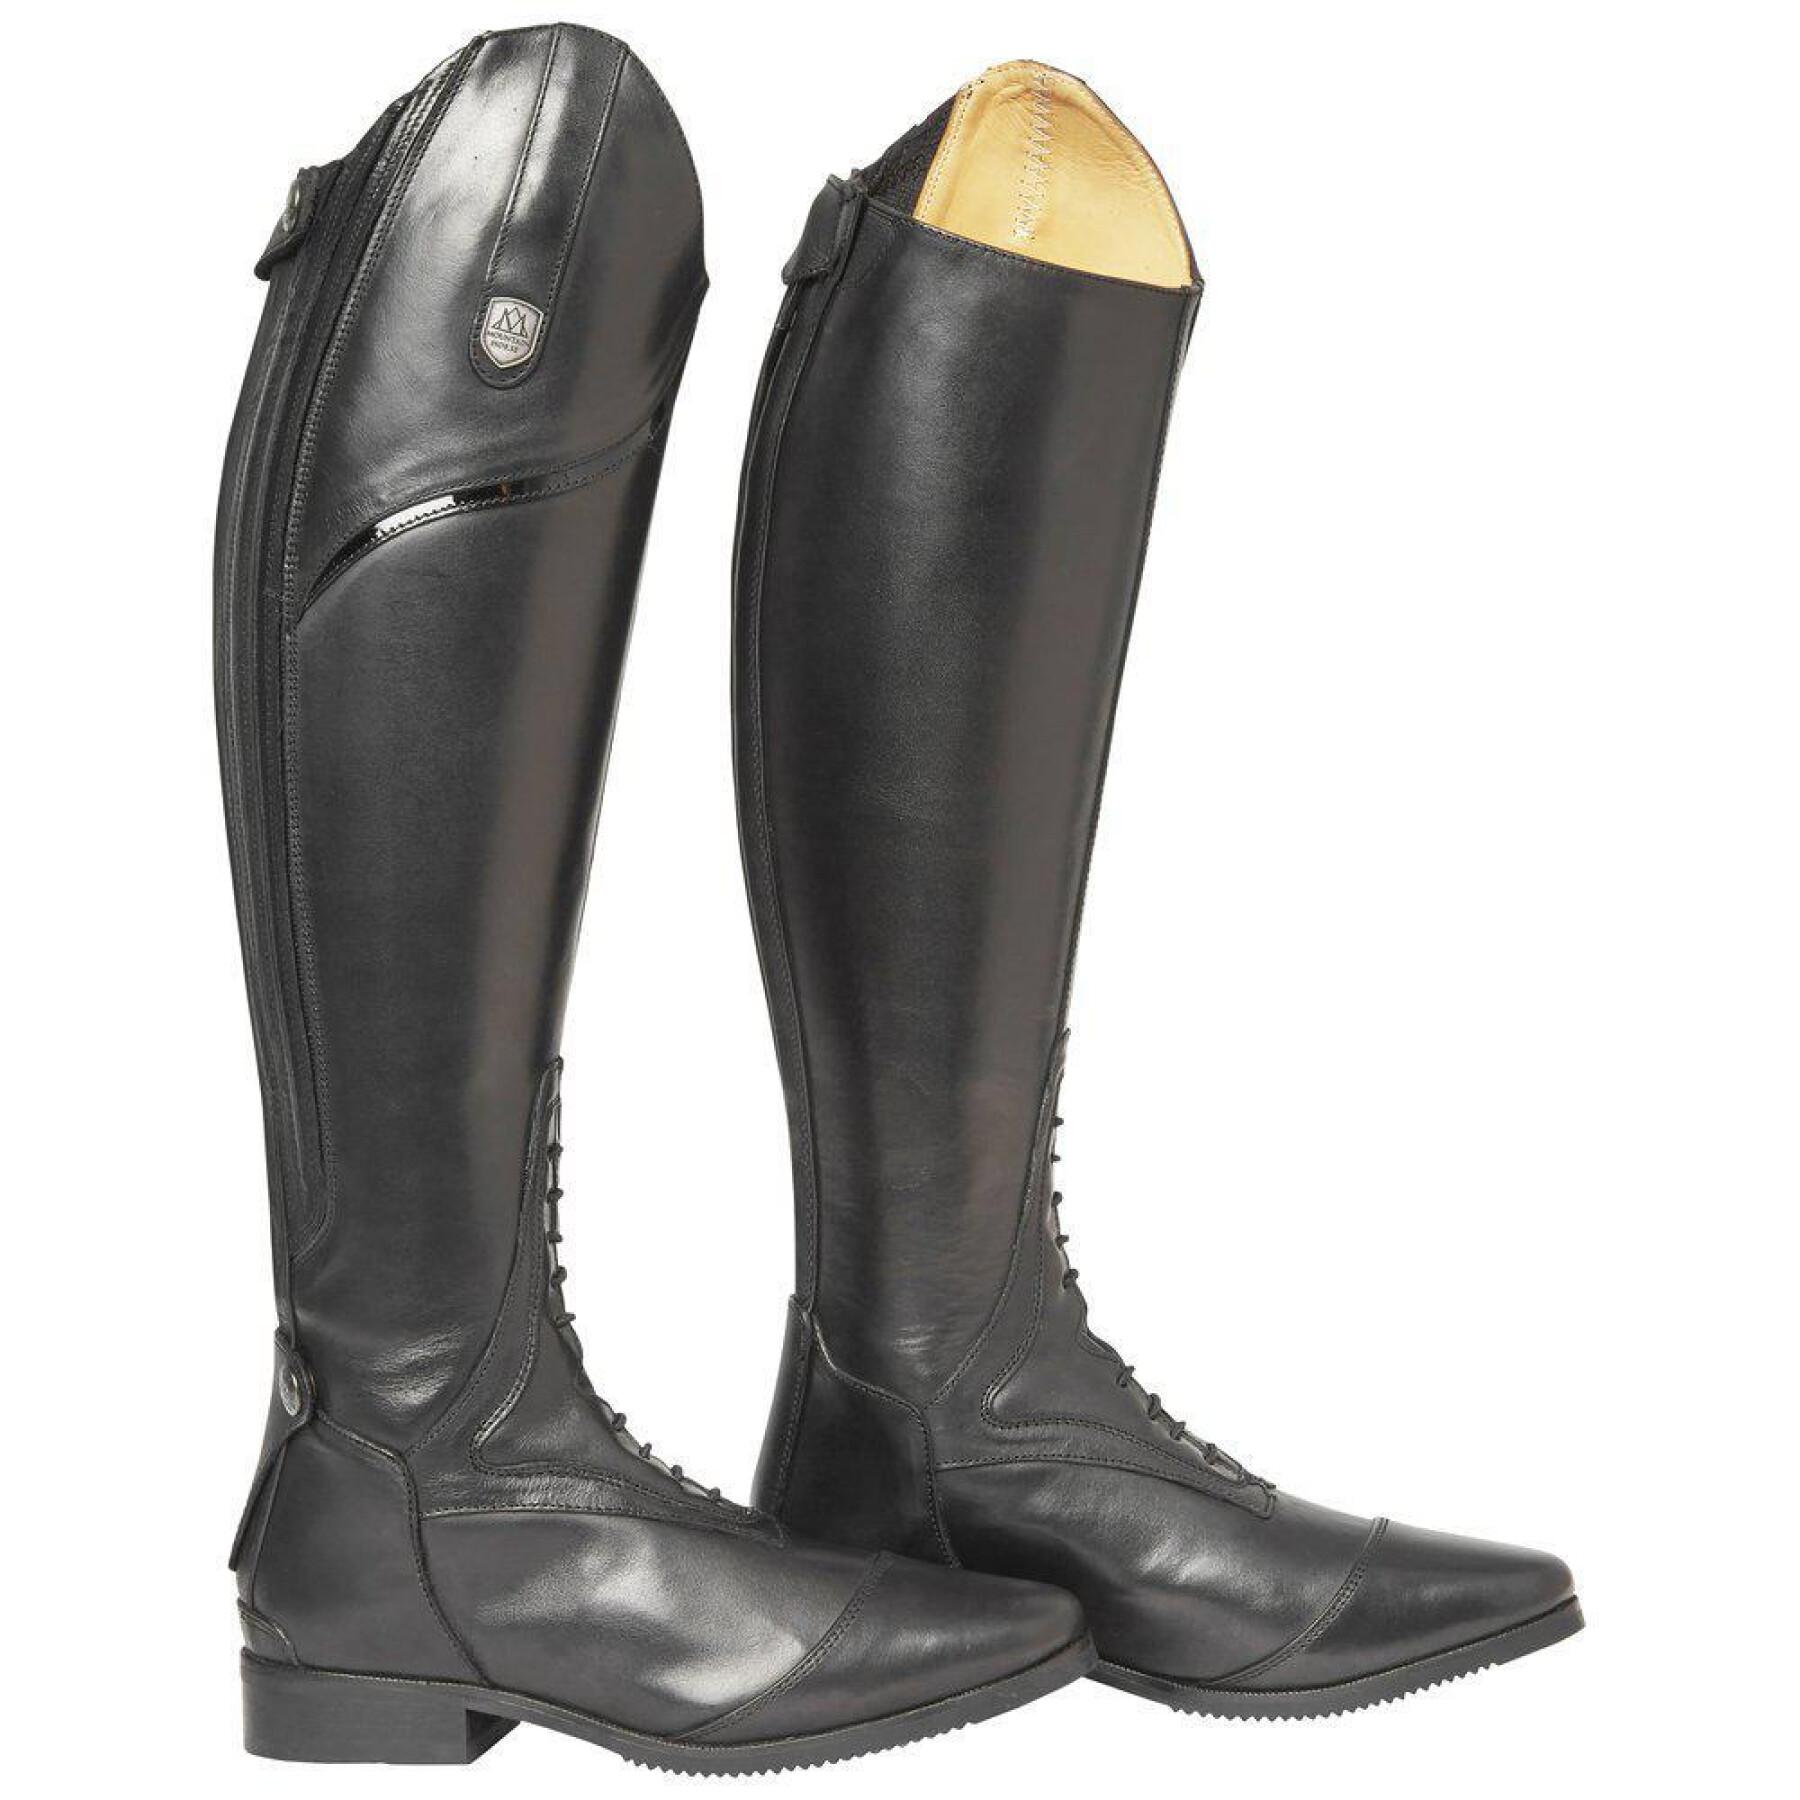 Women's leather riding boots Mountain Horse Sovereign HR Tall Regular